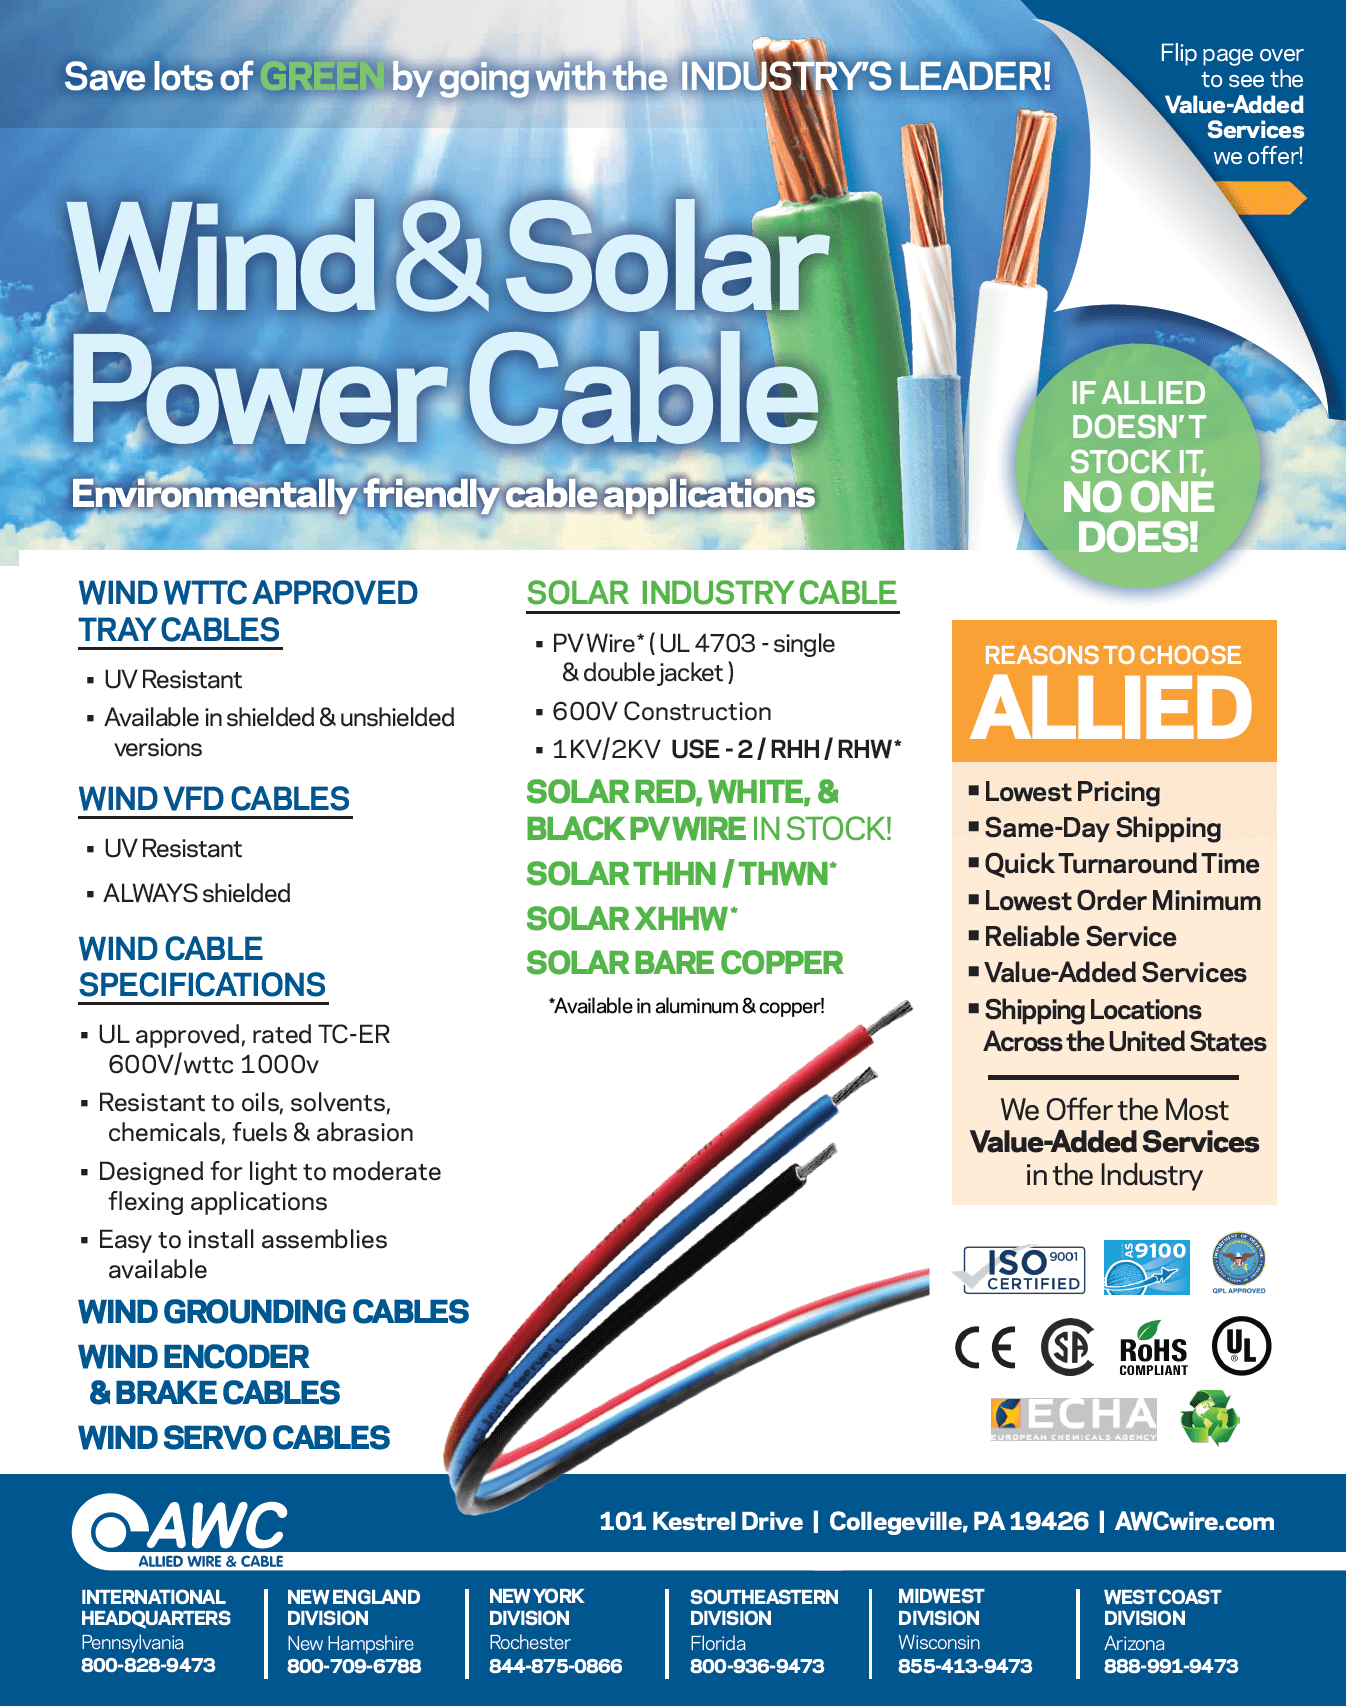 Wind & Solar Power Cable Line Card from Allied Wire & Cable